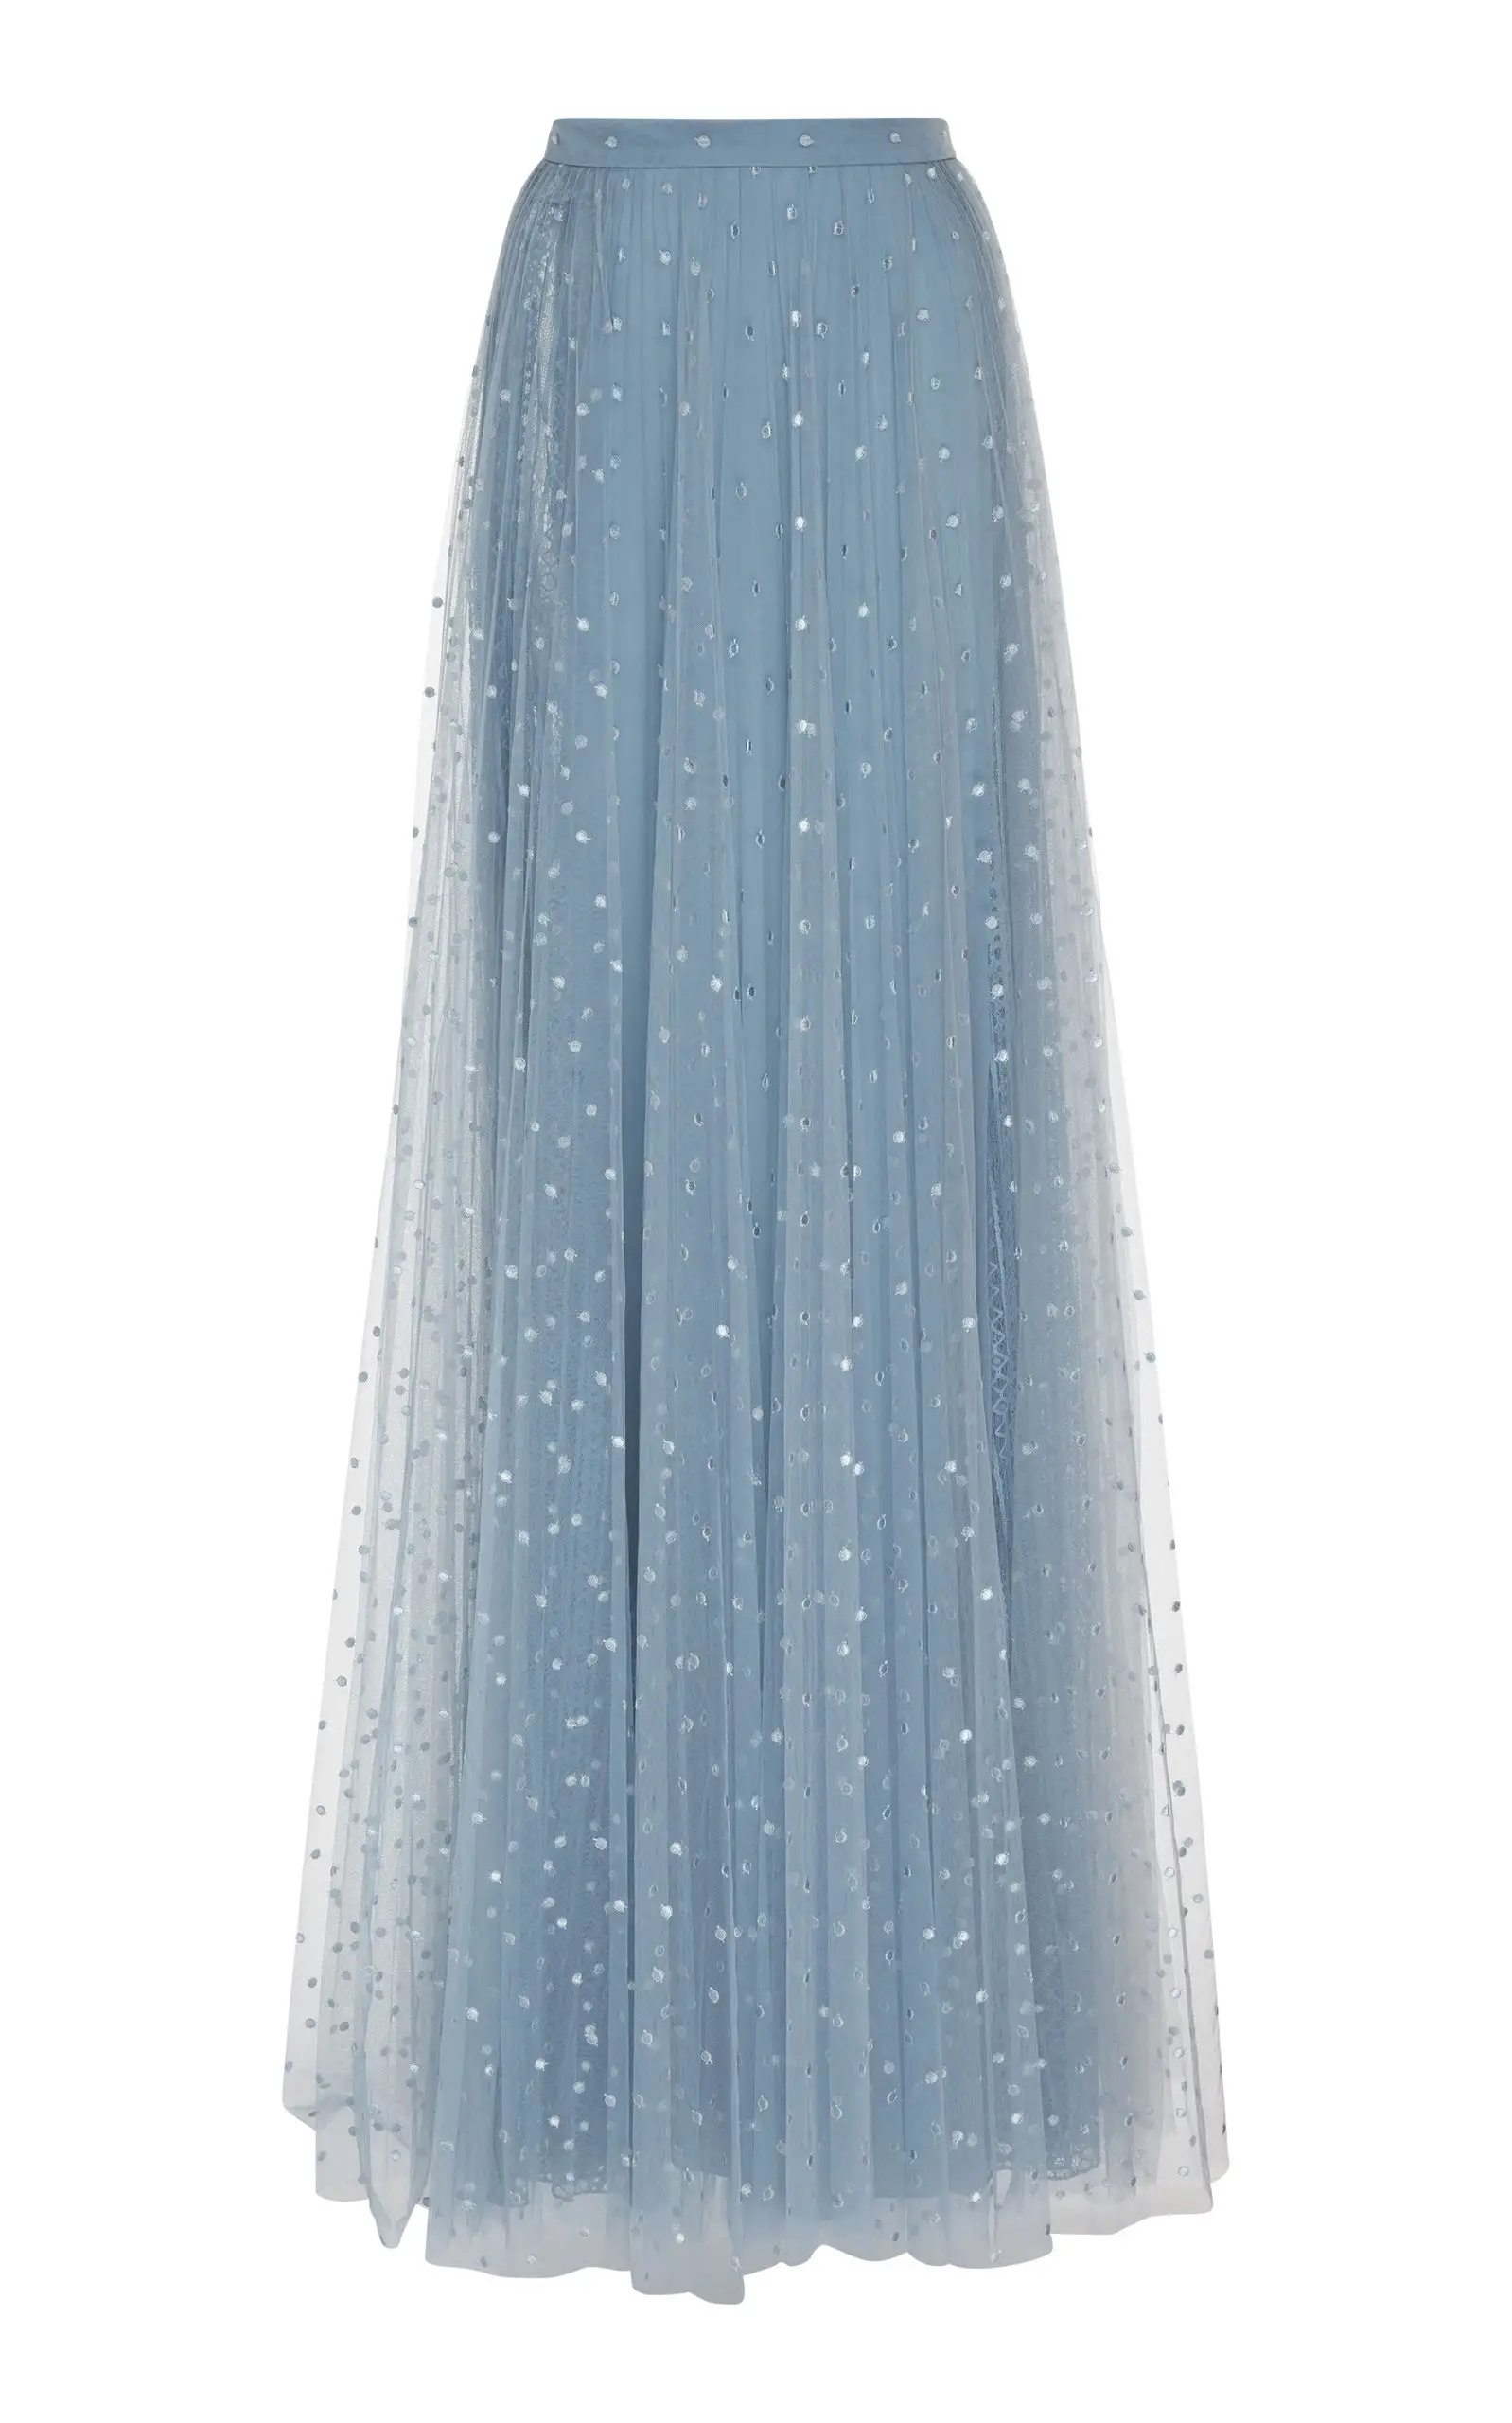 Duchess of cambridge wore Elie Saab Embroidered Tulle Skirt